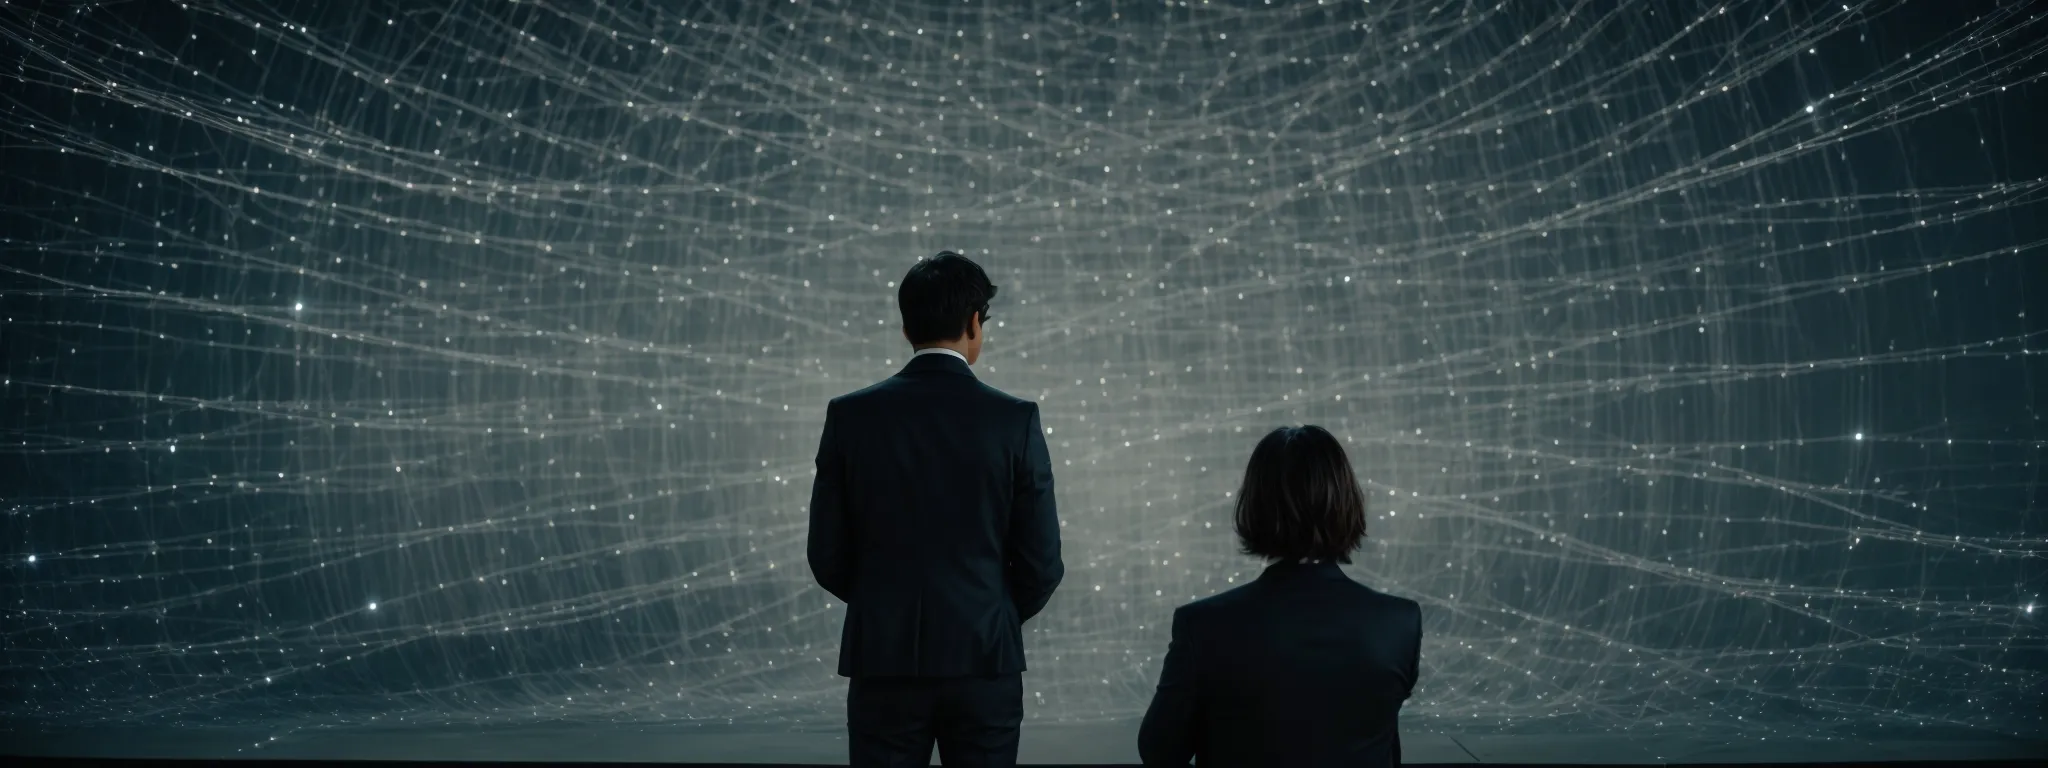 a person in front of a large computer screen analyzing a complex web of interconnected nodes representing a search engine's algorithm.